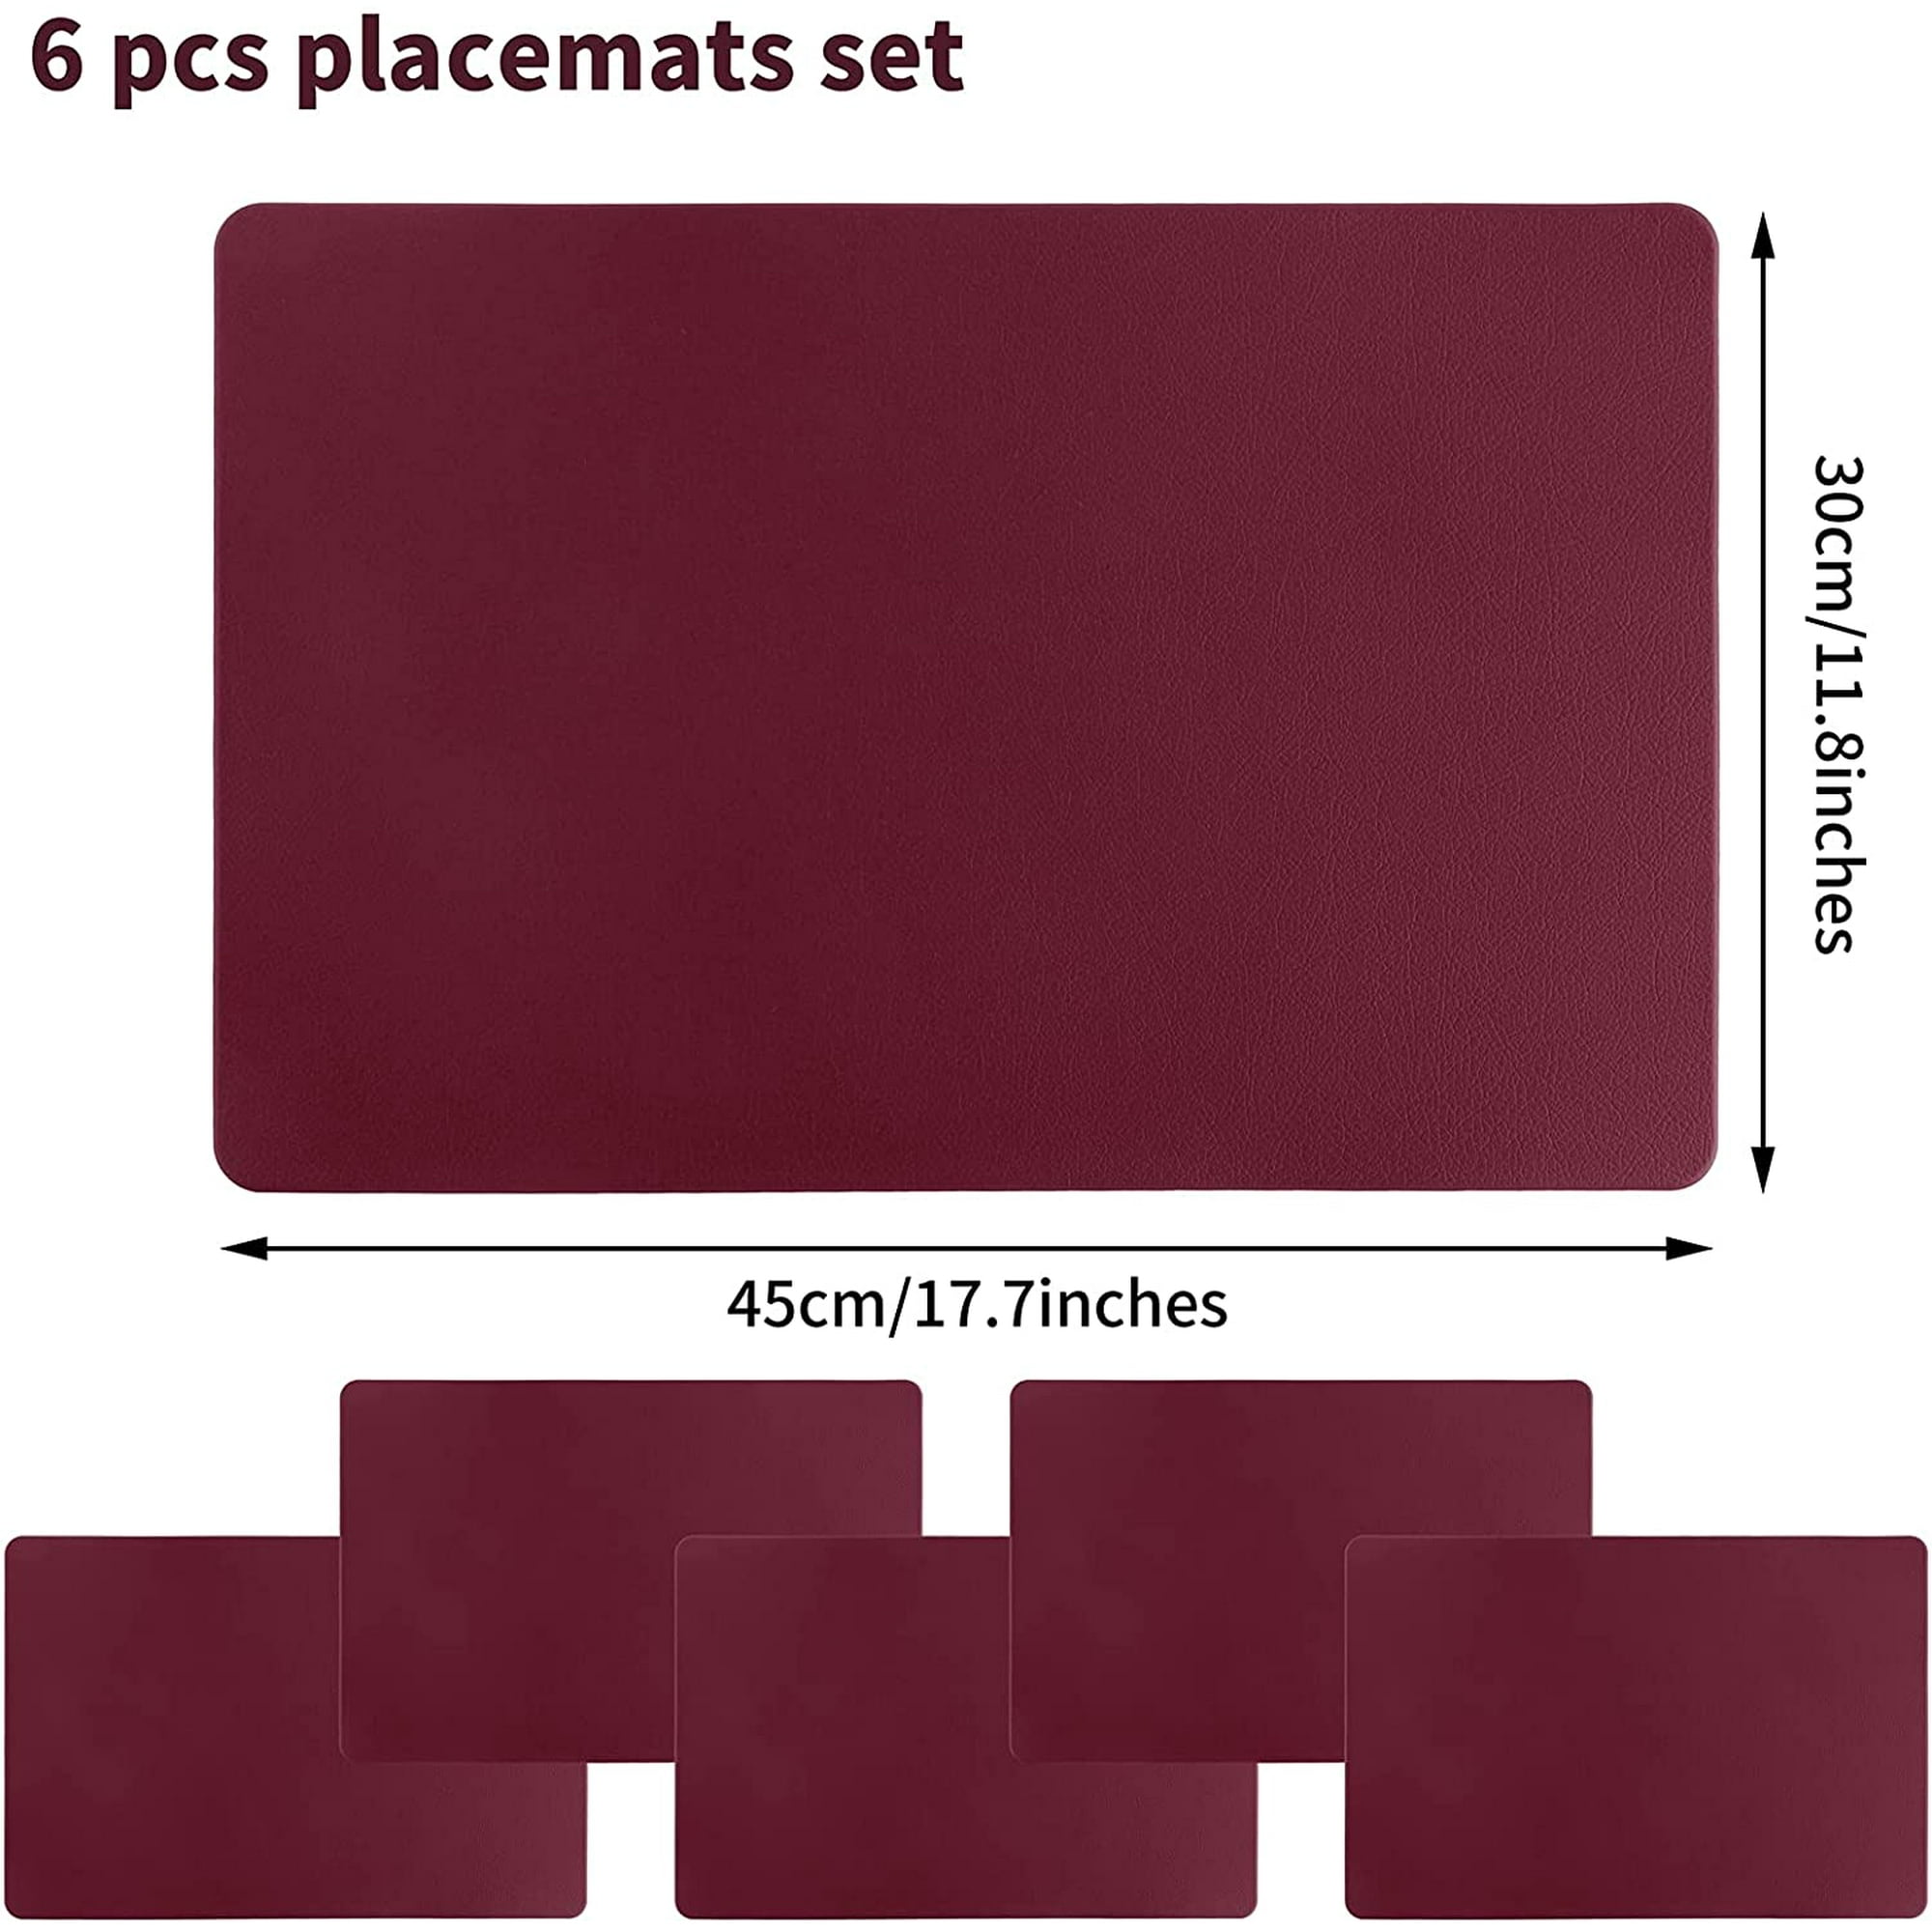 6 Pieces Leather Placemat Heat, Red Leather Placemats